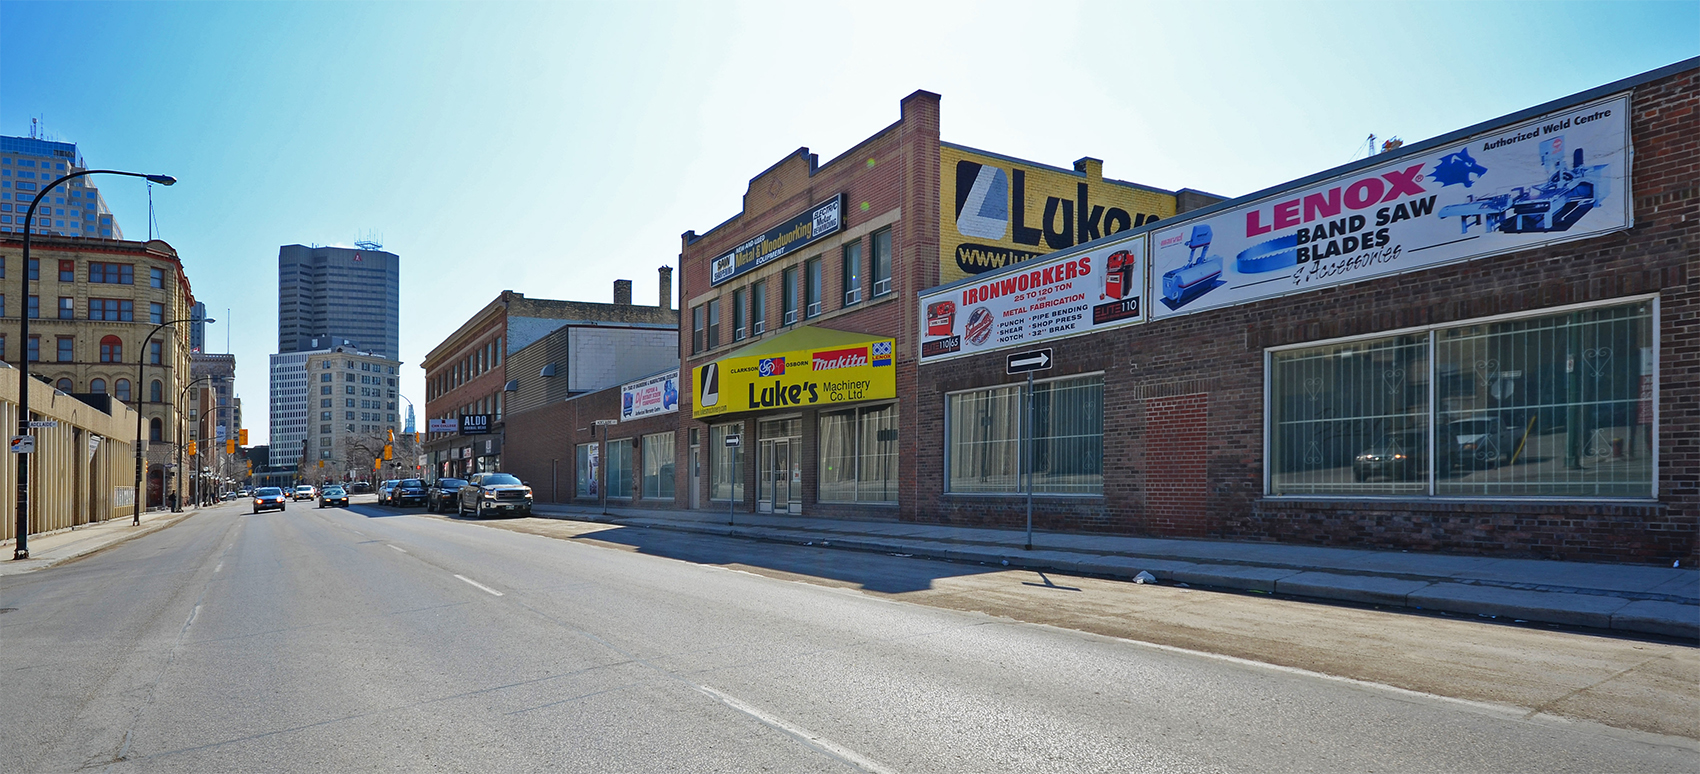 Luke's Machinery Co. an icon on Winnipeg's Main Street strip and a project of Number TEN's architects.